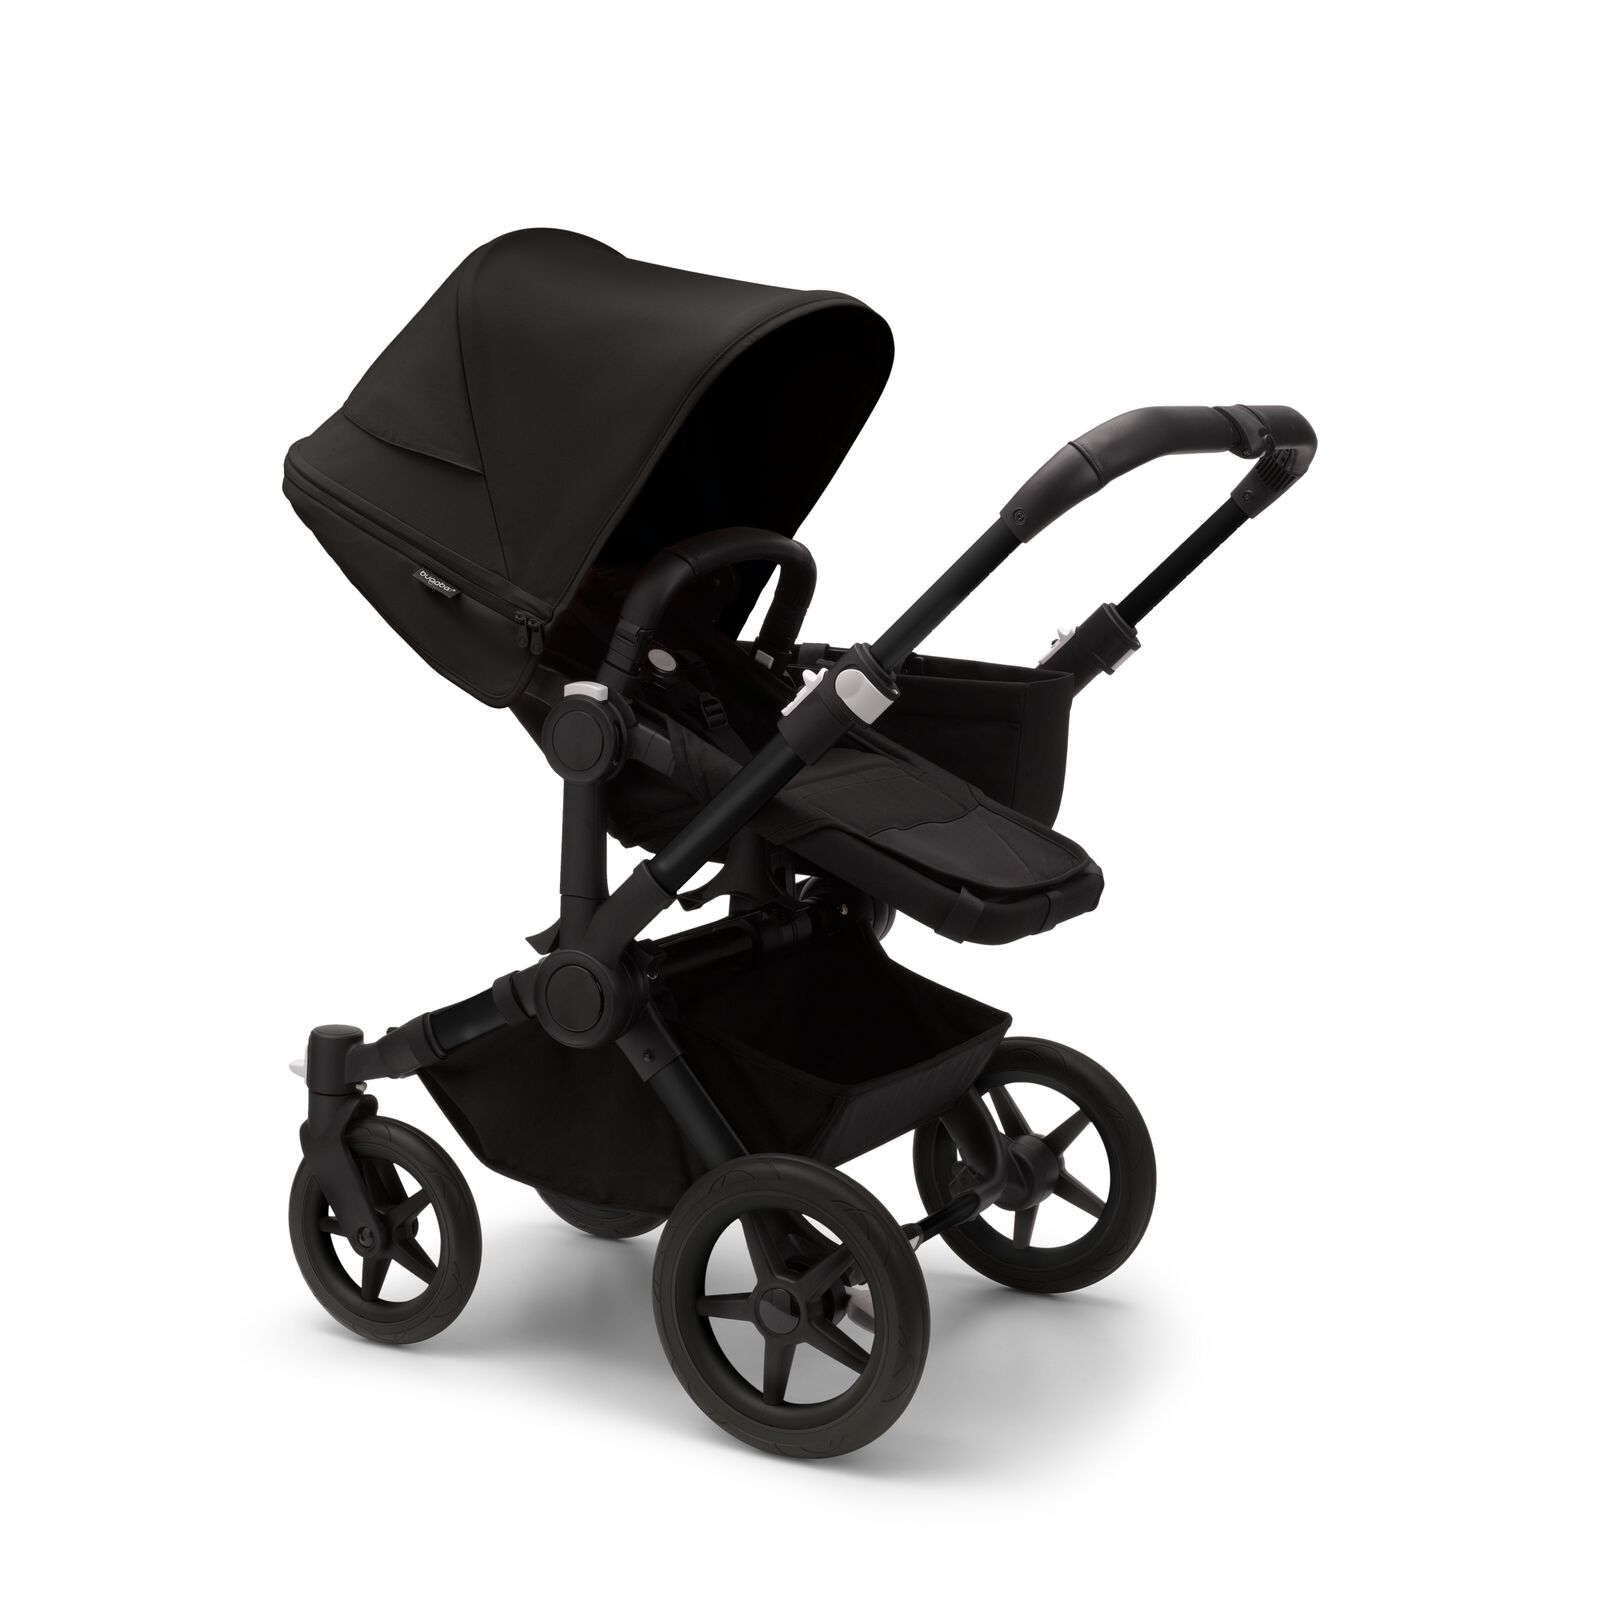 Bugaboo Donkey 5 Mono seat stroller with black chassis, midnight black fabrics and midnight black sun canopy.